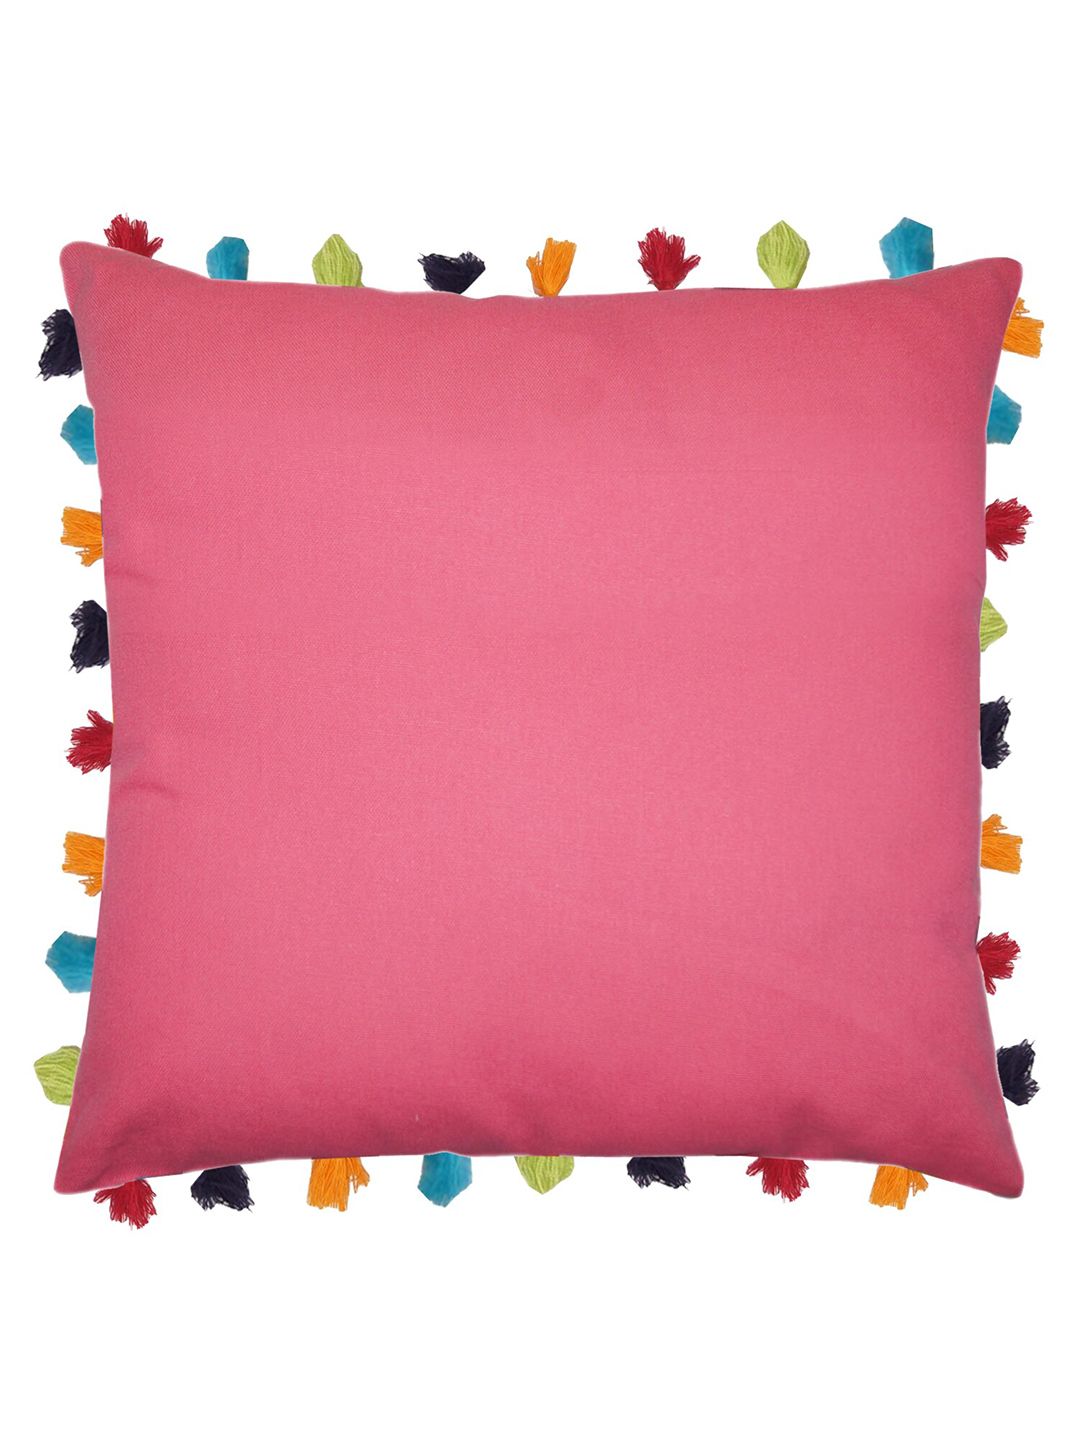 Lushomes Pink Solid Square Cushion Covers Price in India